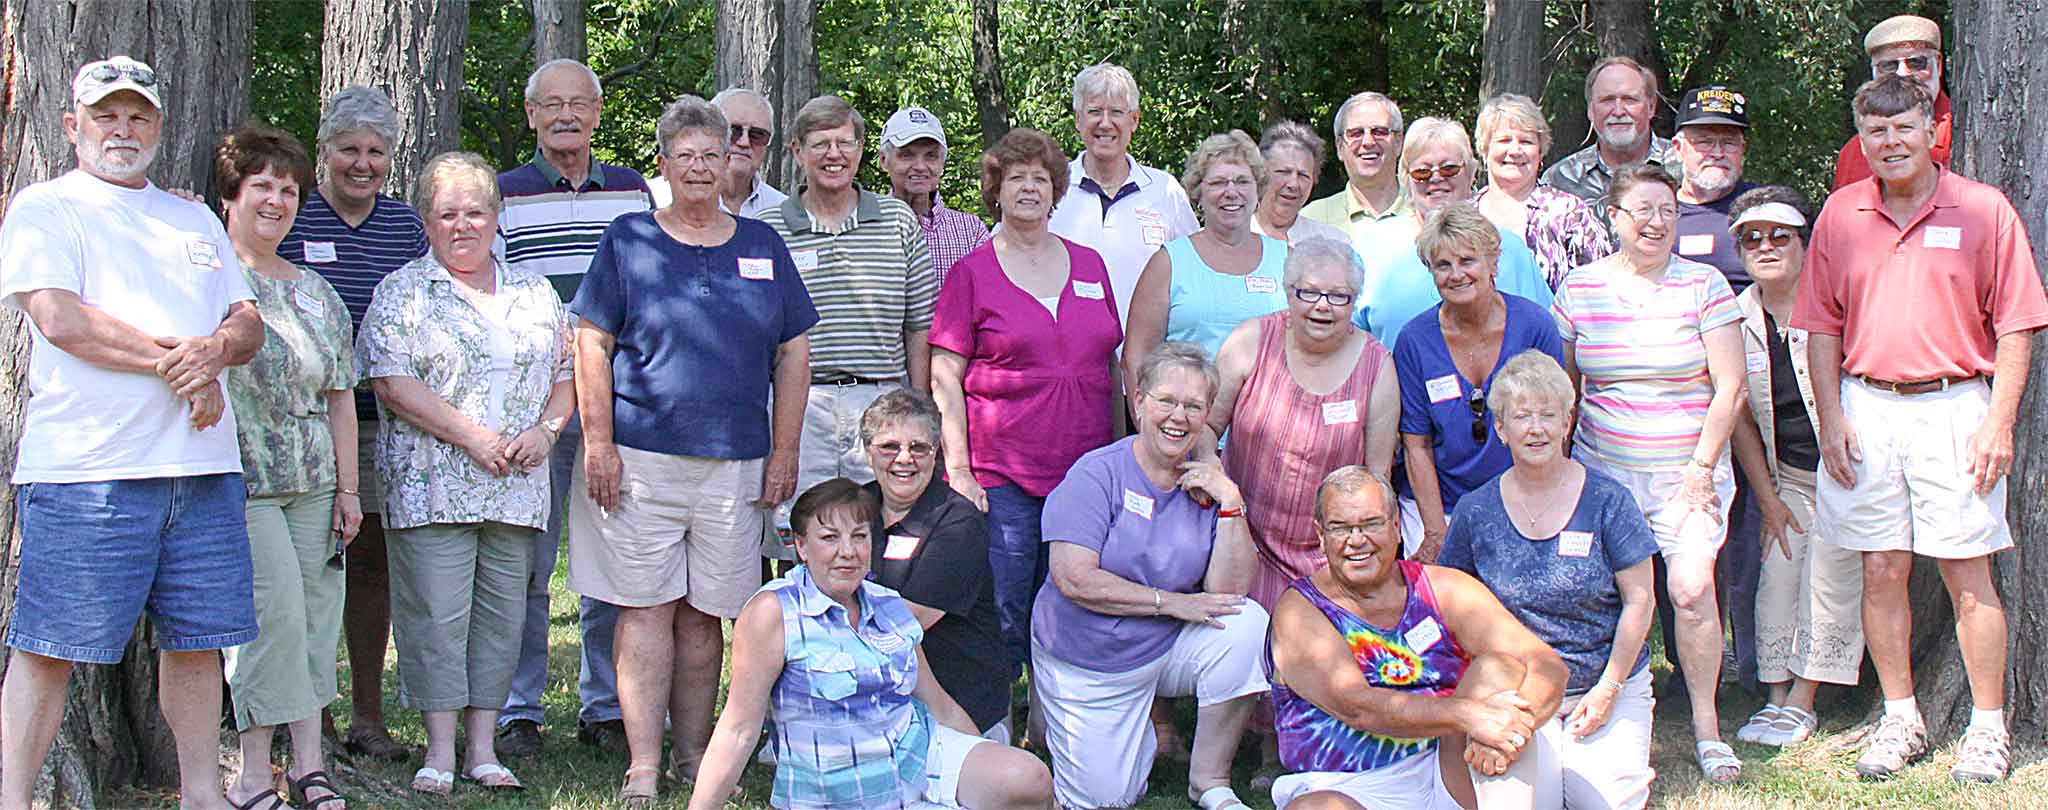 class of 1962 65th birthday party group picture